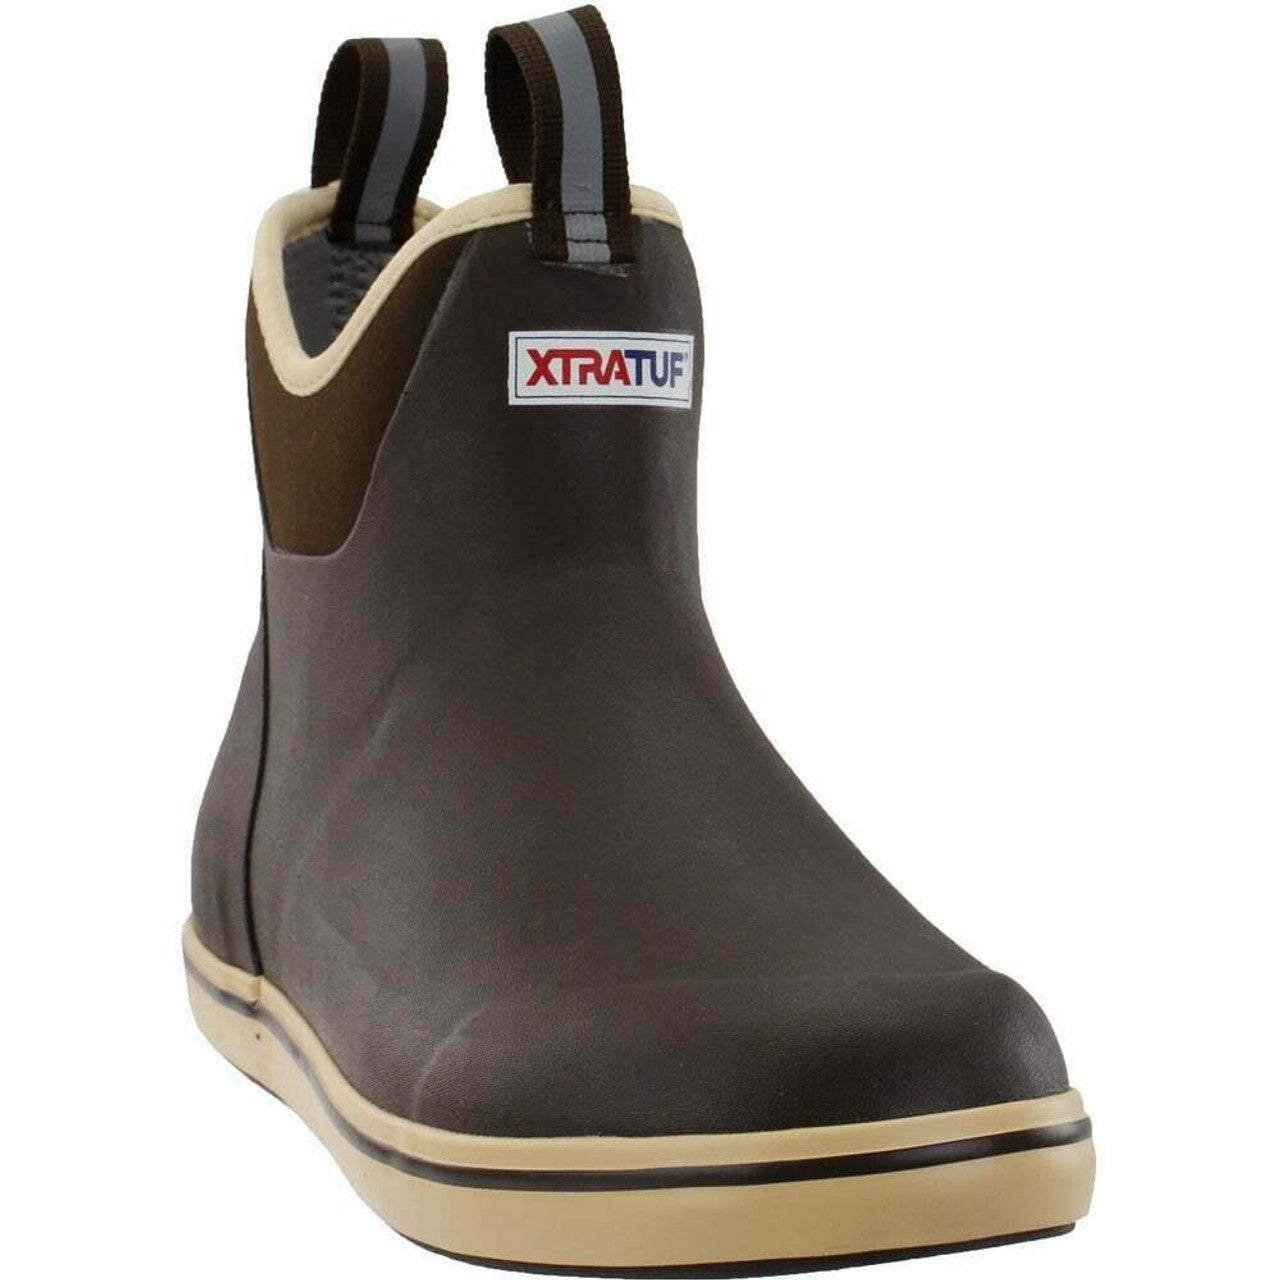 Xtratuf Ankle Full Rubber Deck Boot - Size 13 - Chocolate/Tan, 6"